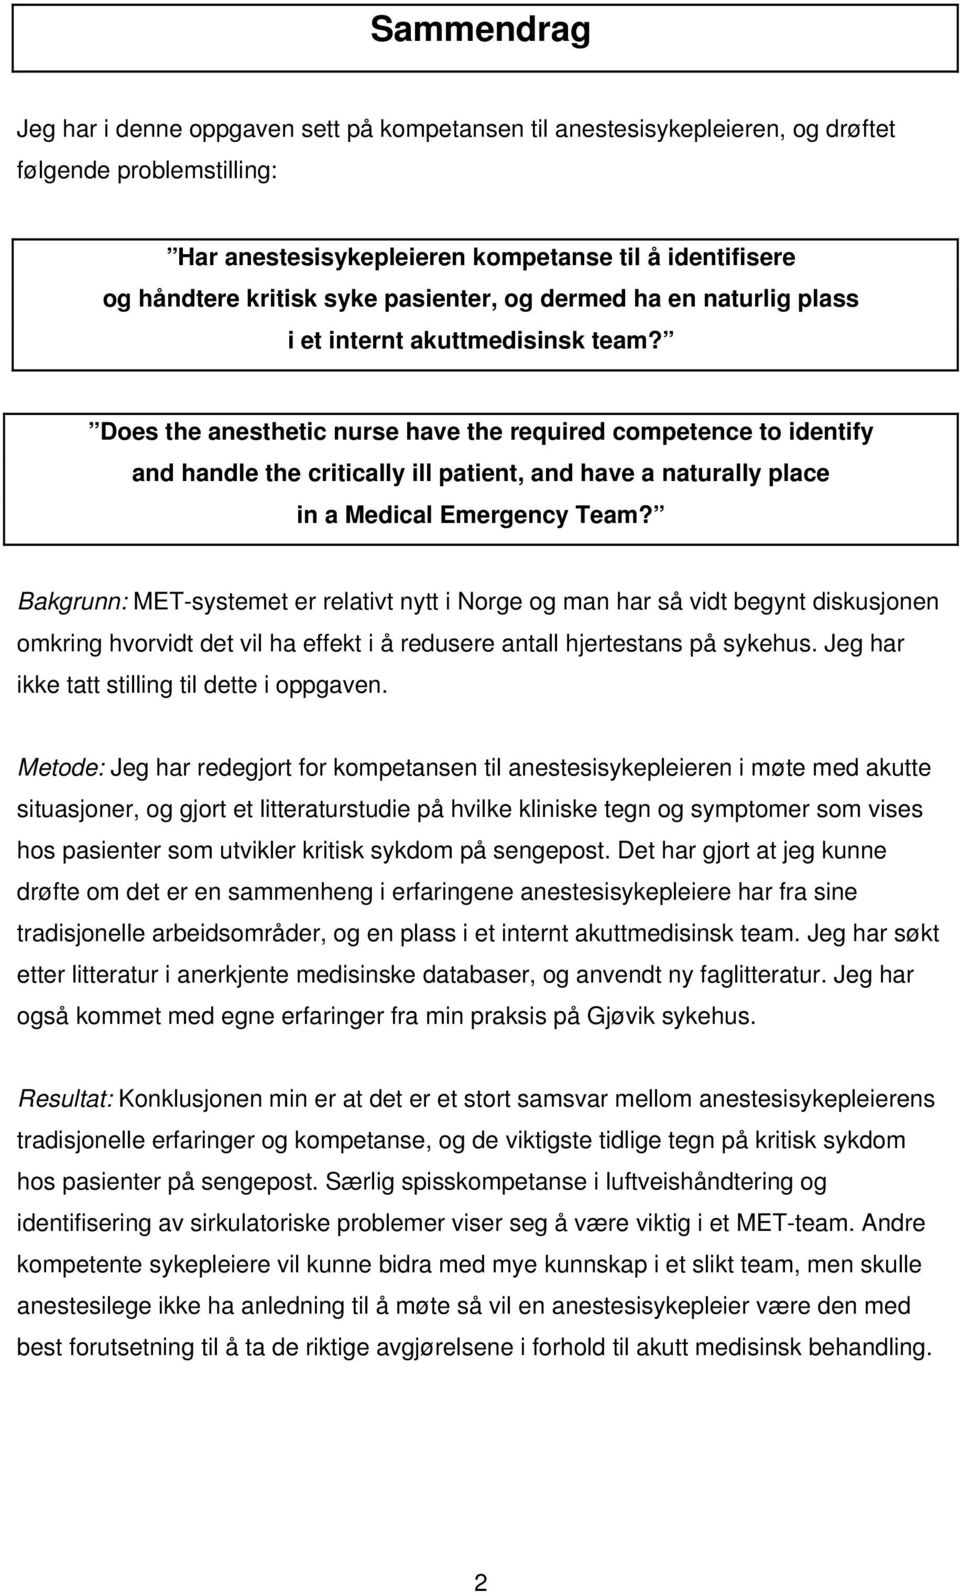 Does the anesthetic nurse have the required competence to identify and handle the critically ill patient, and have a naturally place in a Medical Emergency Team?